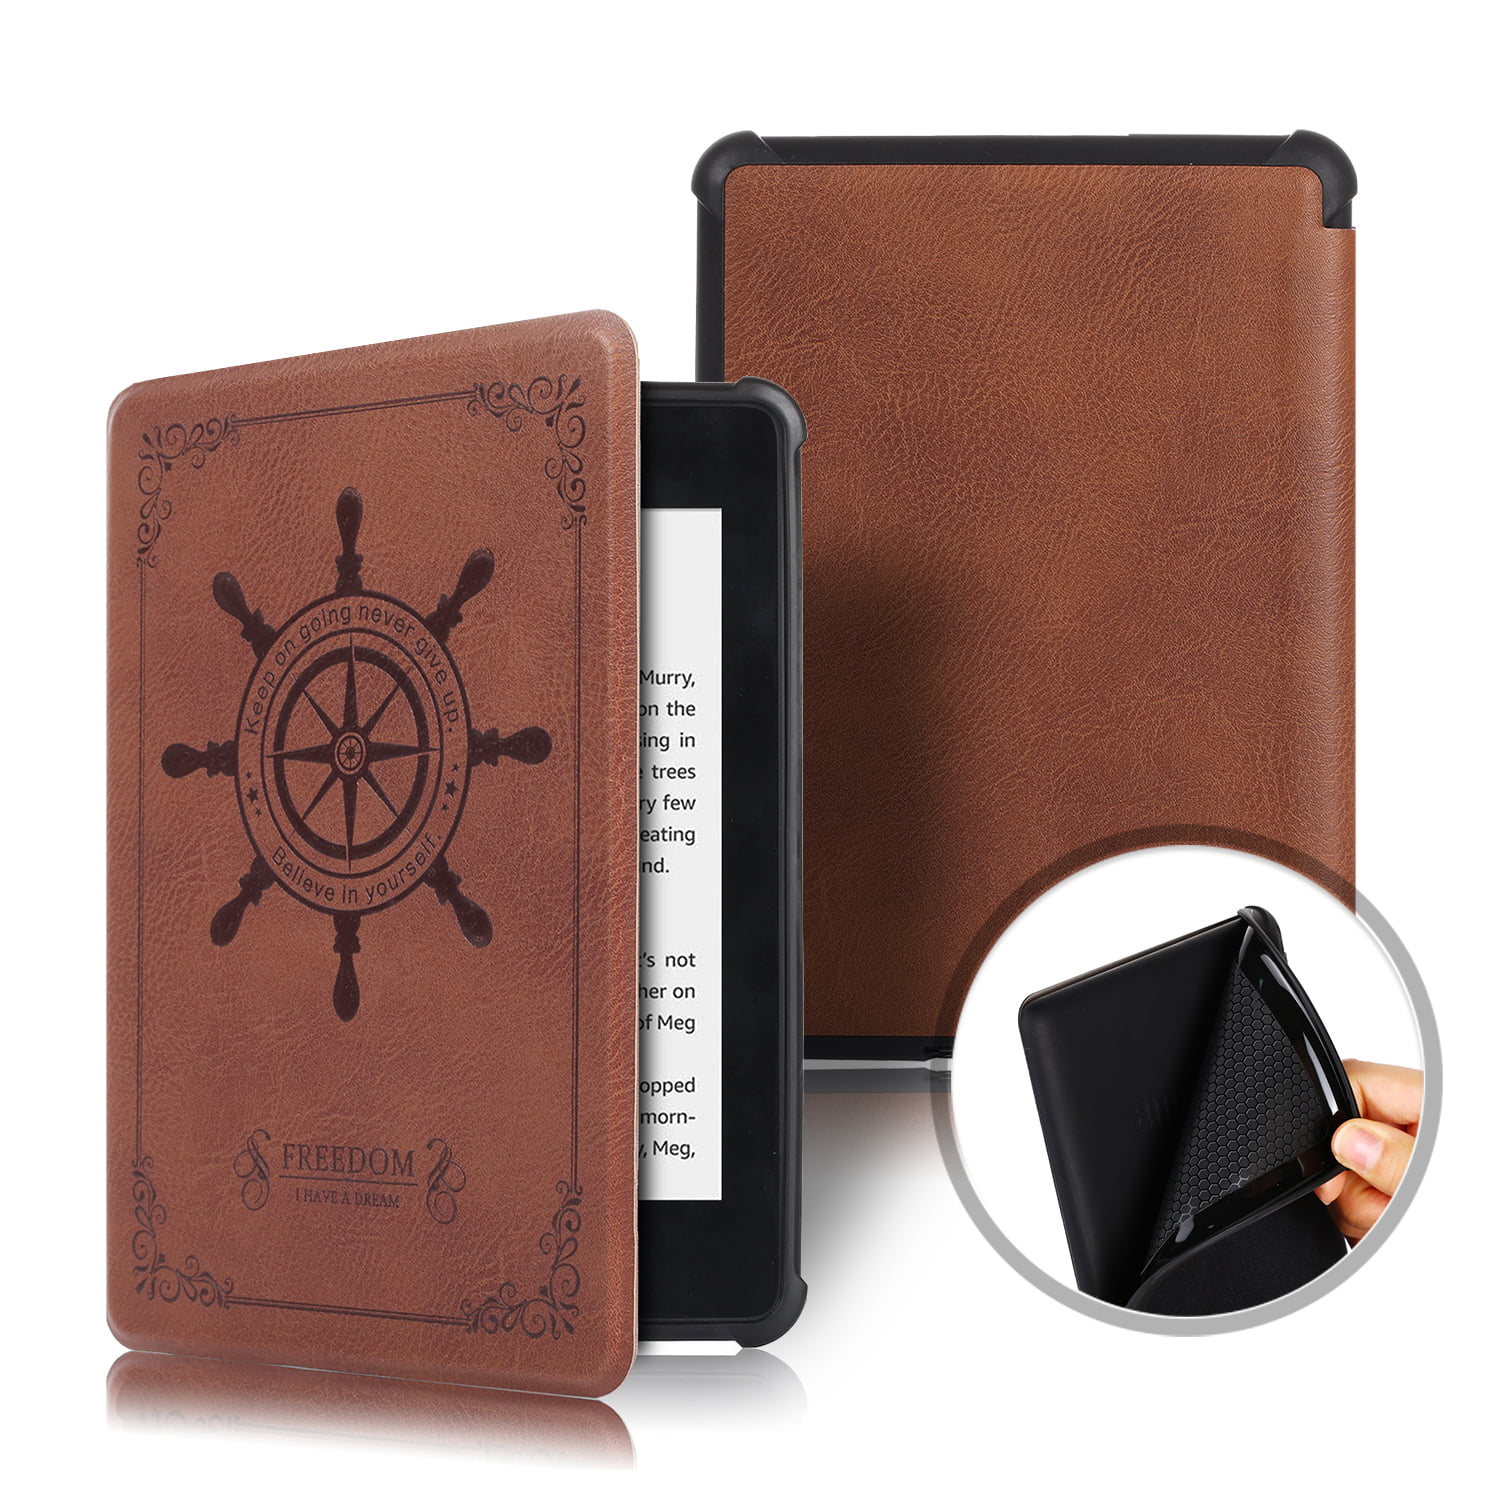 Kindle Paperwhite 2018 Case 10th Generation, Allytech Premium Leather